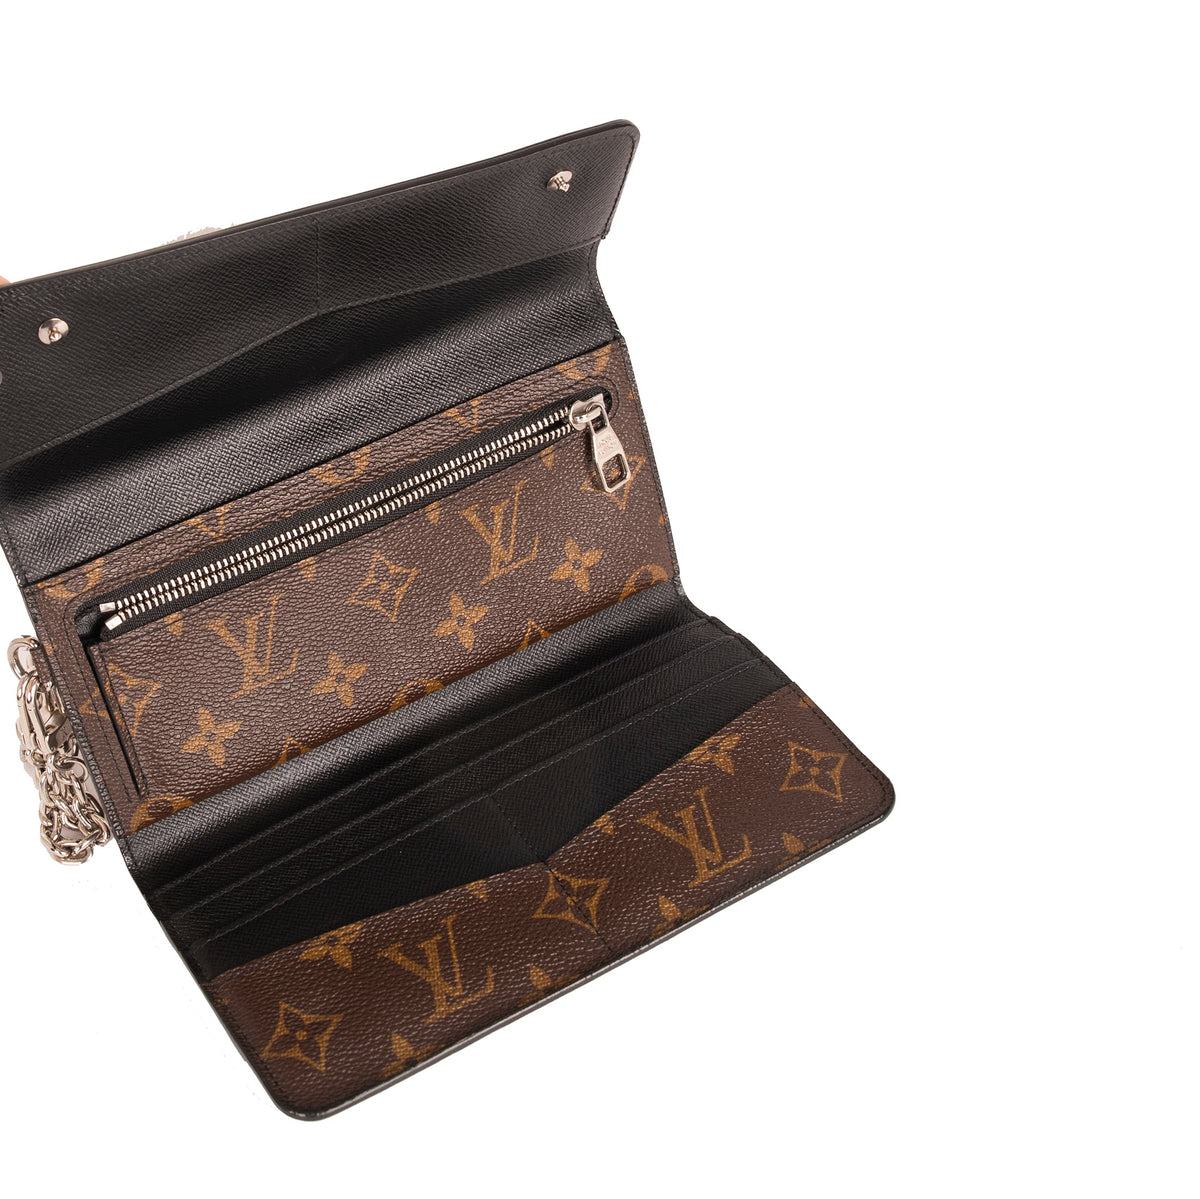 Shop Louis Vuitton Monogram Macassar Ron Wallet Louis Vuitton and save big!  Shop for the best items at a great price and get great service